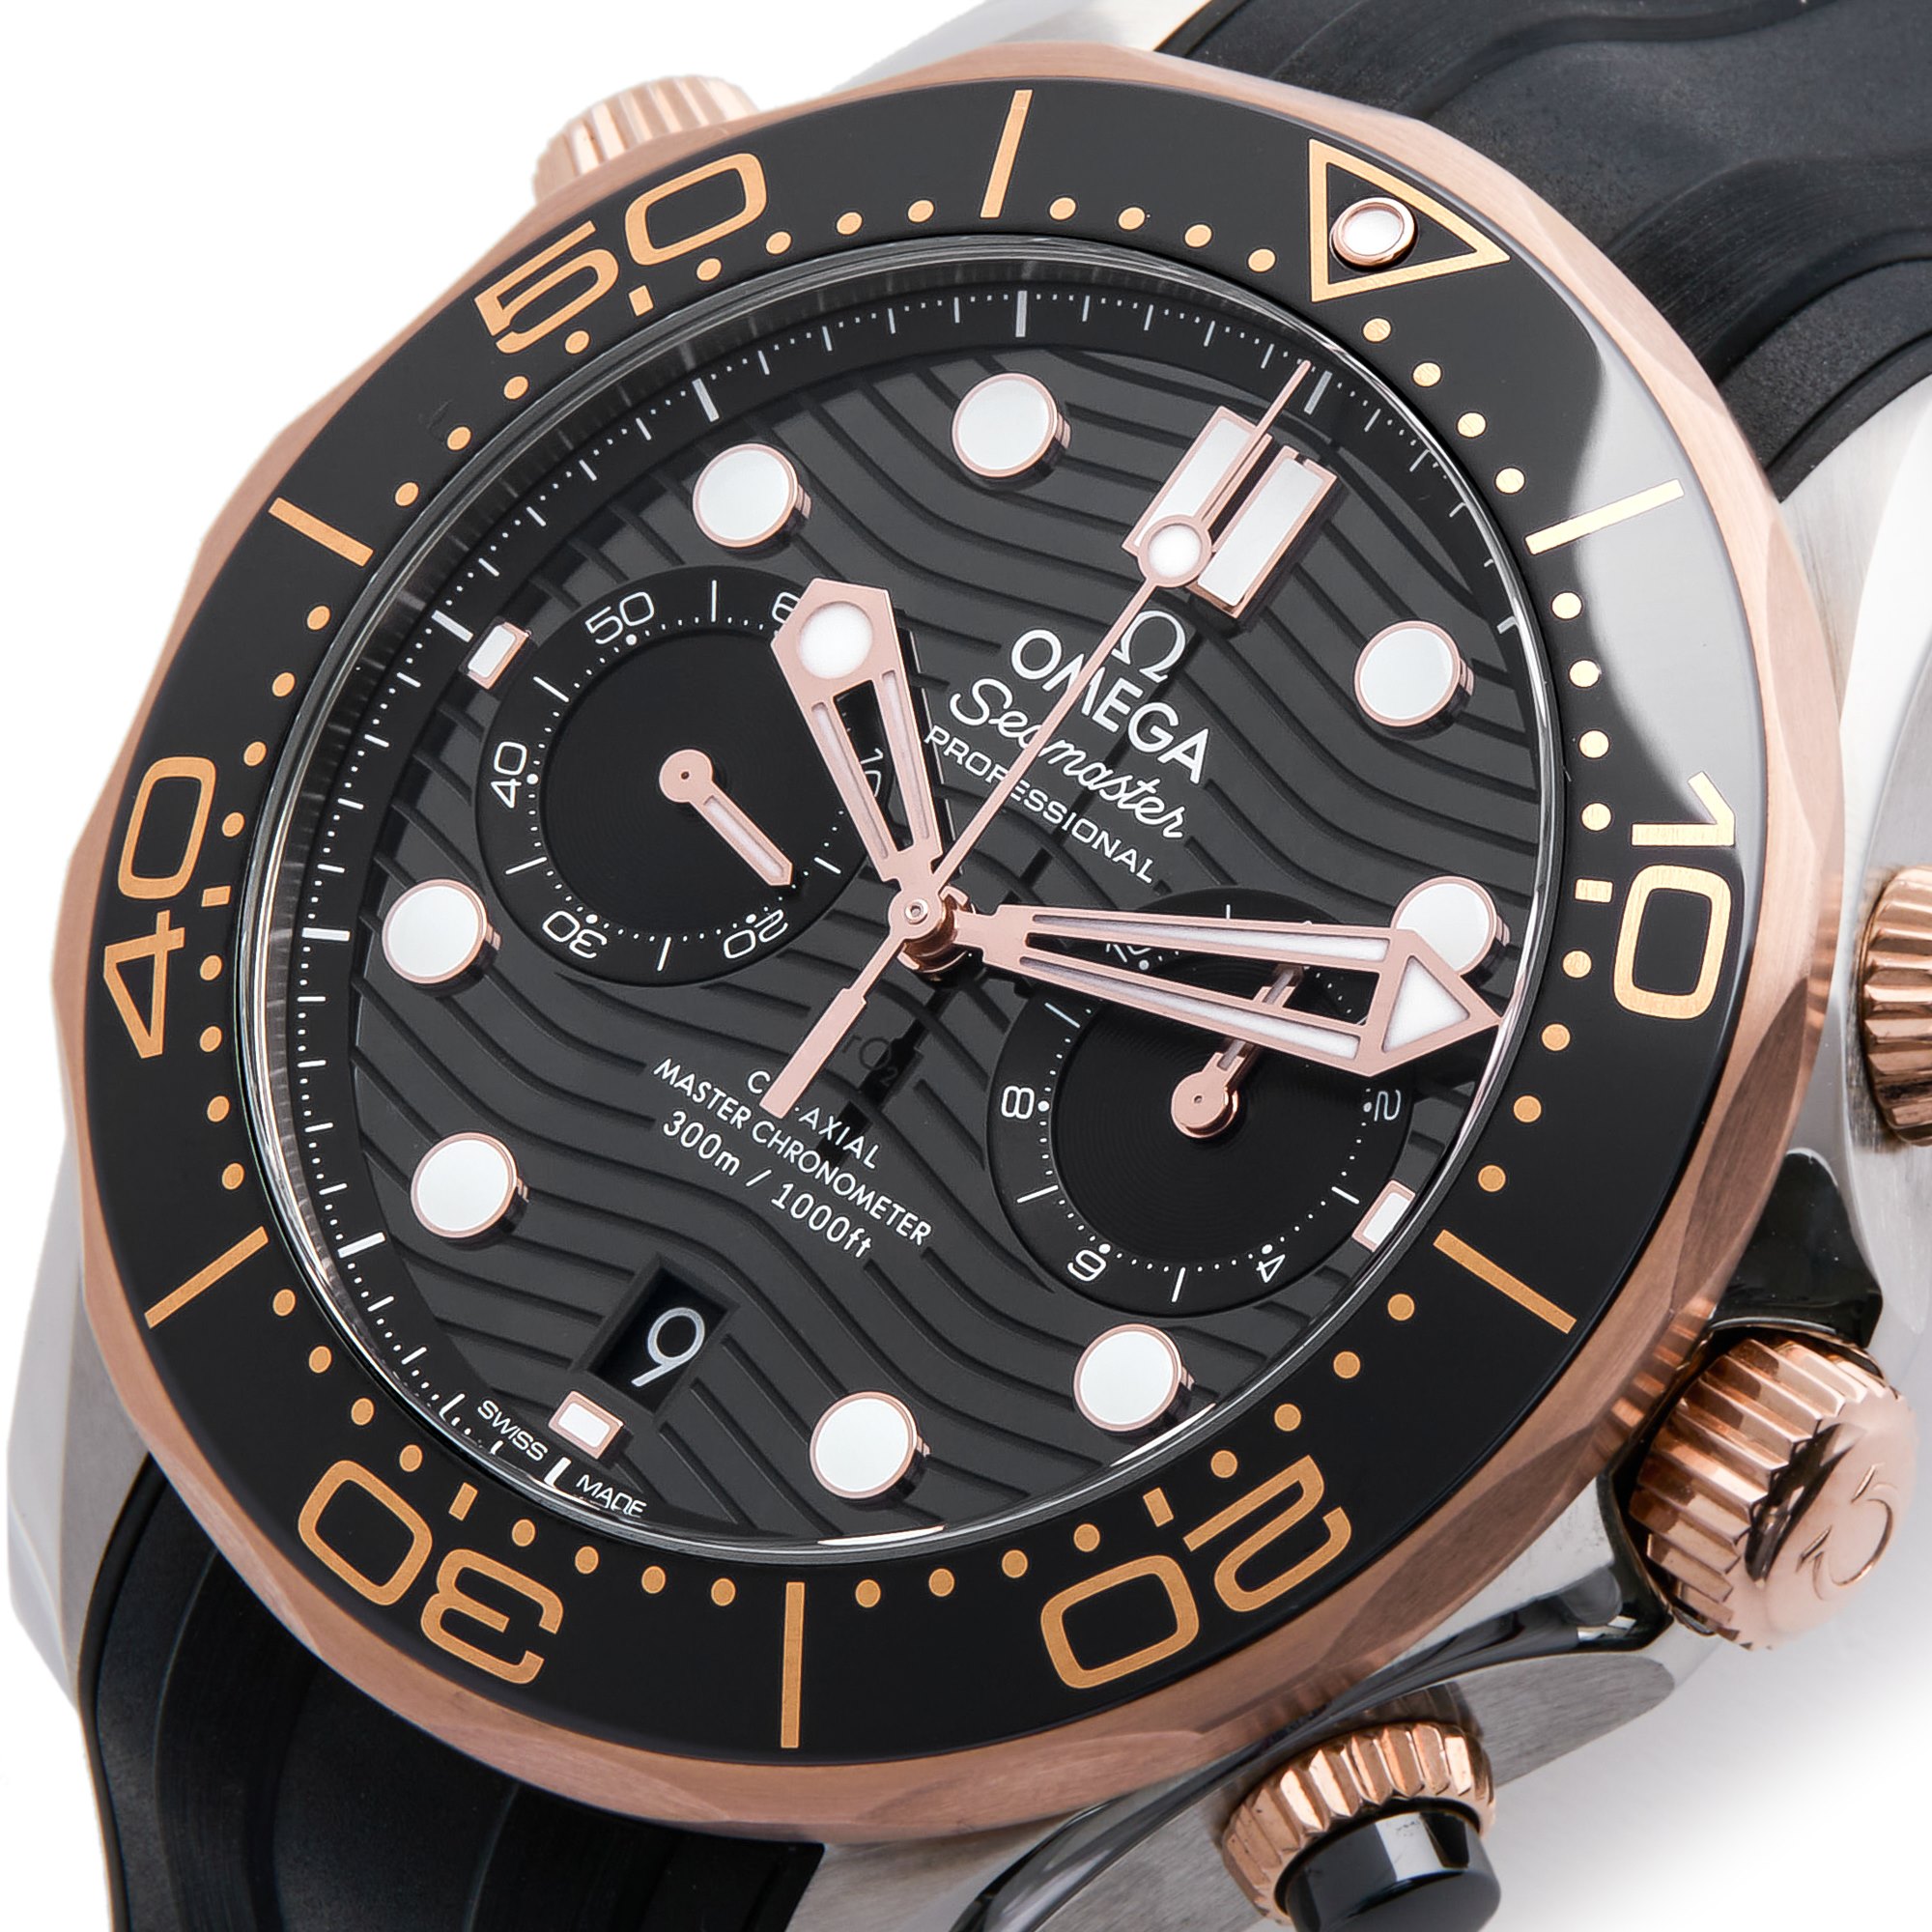 Omega Seamaster Chronograph Rose Gold & Stainless Steel 210.22.44.51.01.001